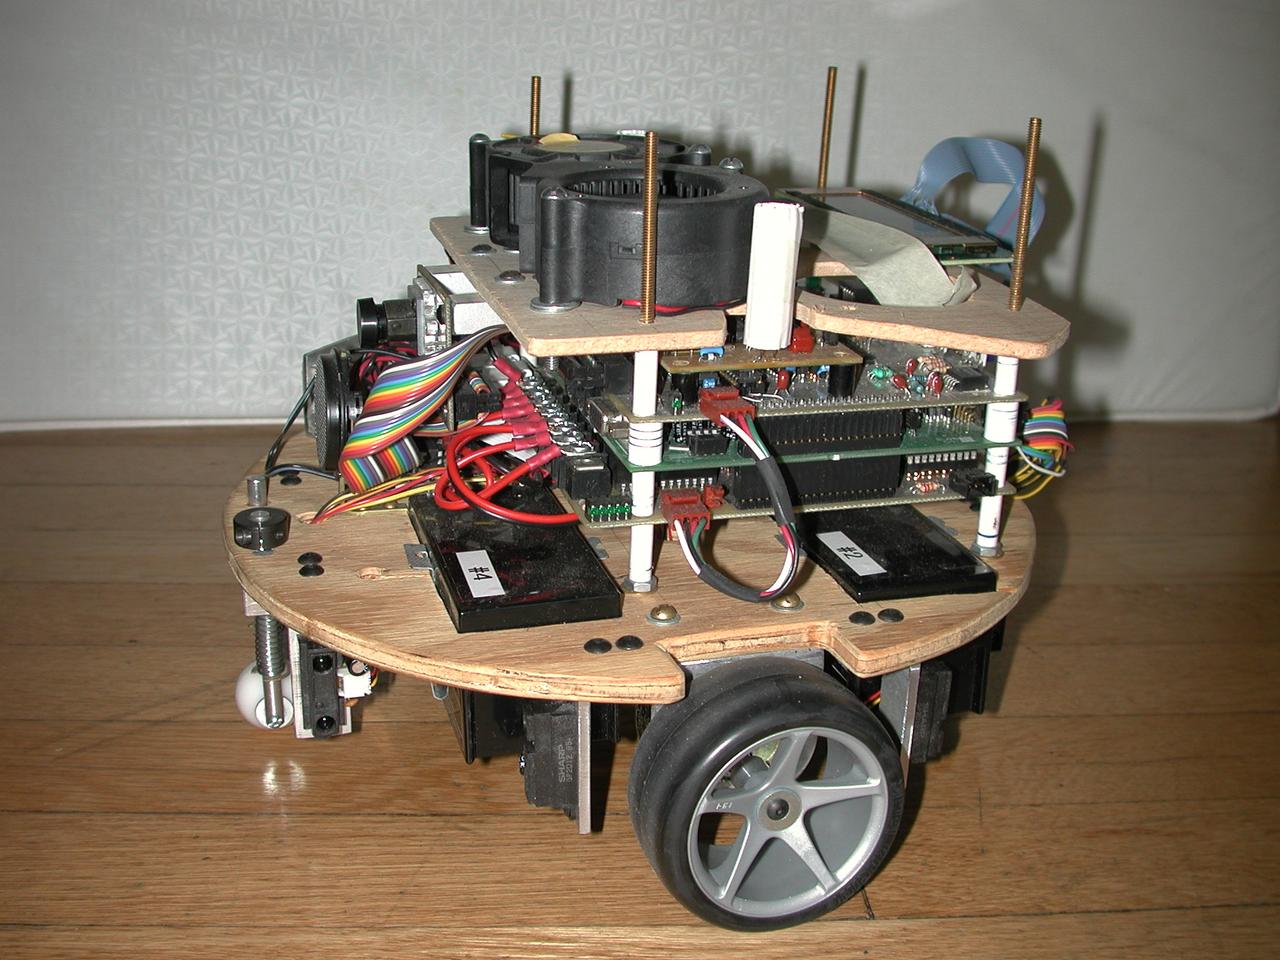 Second entry - blowers for extinguishing flame, IR range sensors, wheels directly driven by gear motors with encoders, custom printed circuit boards, sonar and video for flame detection